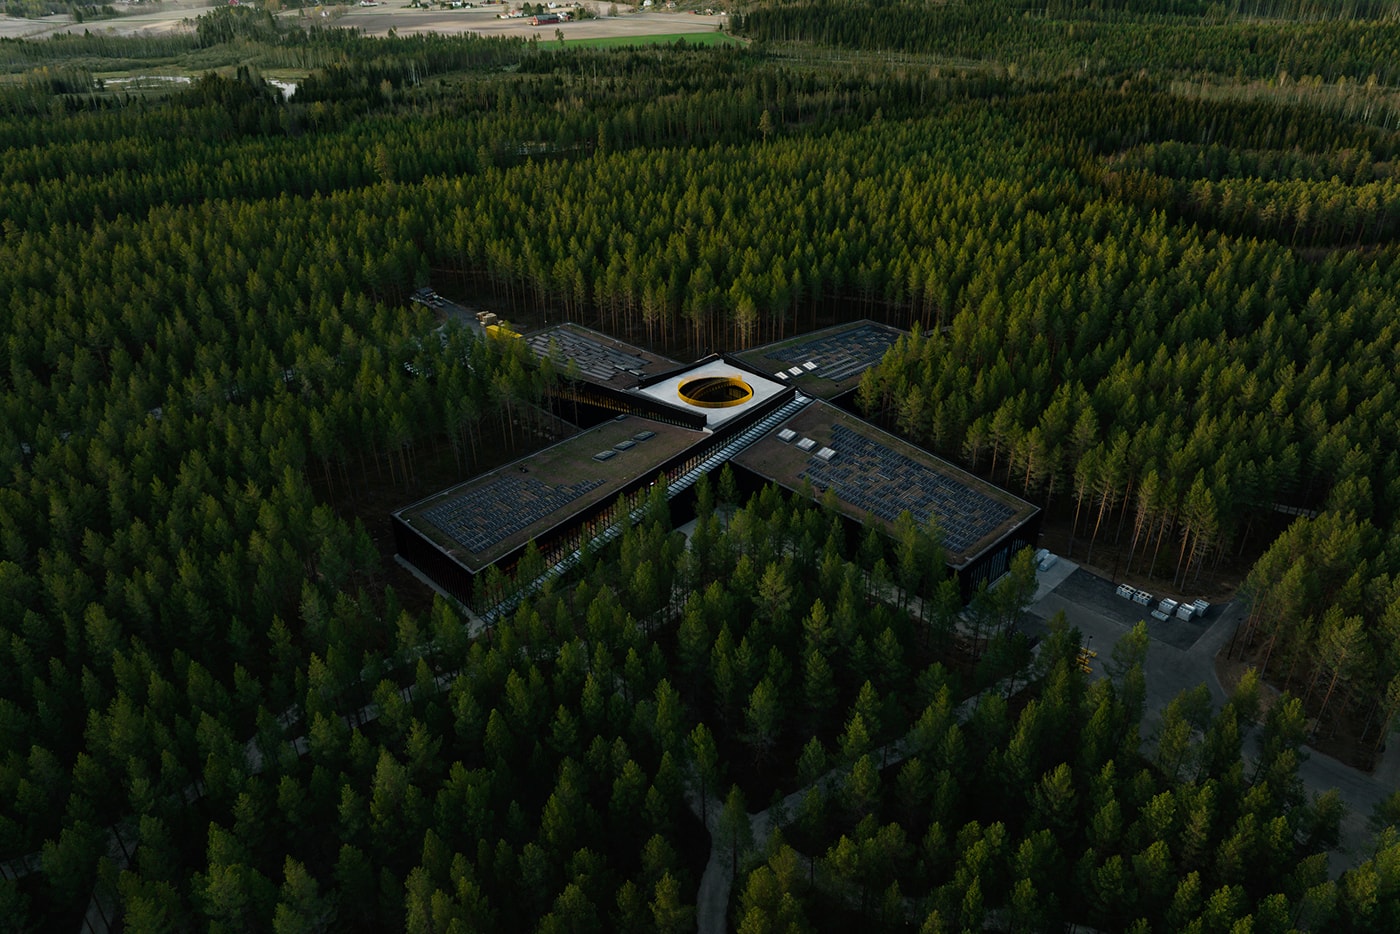 Bjarke Ingels Group Creates "World's Most Sustainable Factory" for Vestre